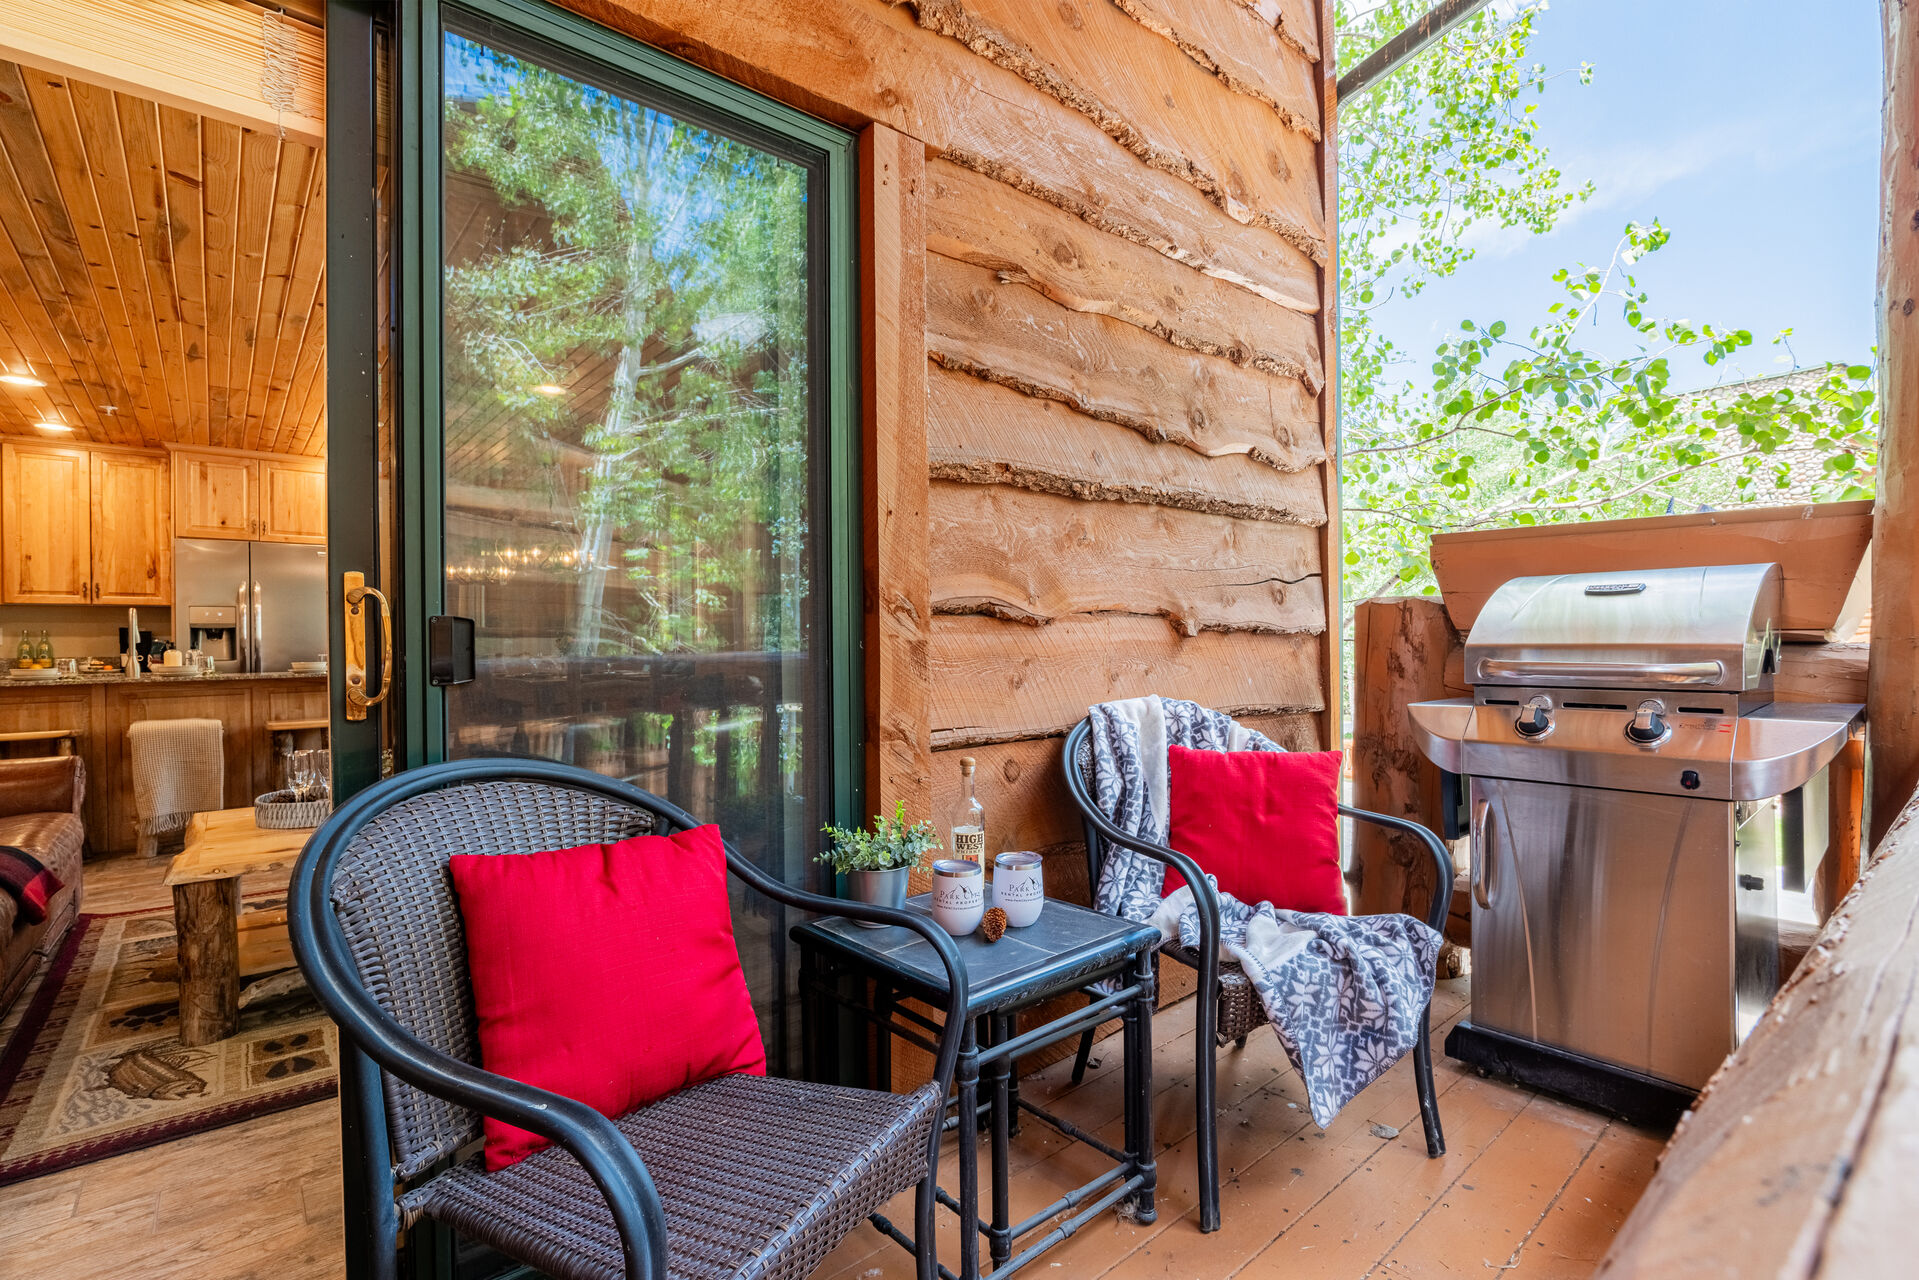 Private balcony with outdoor seating and propane grill